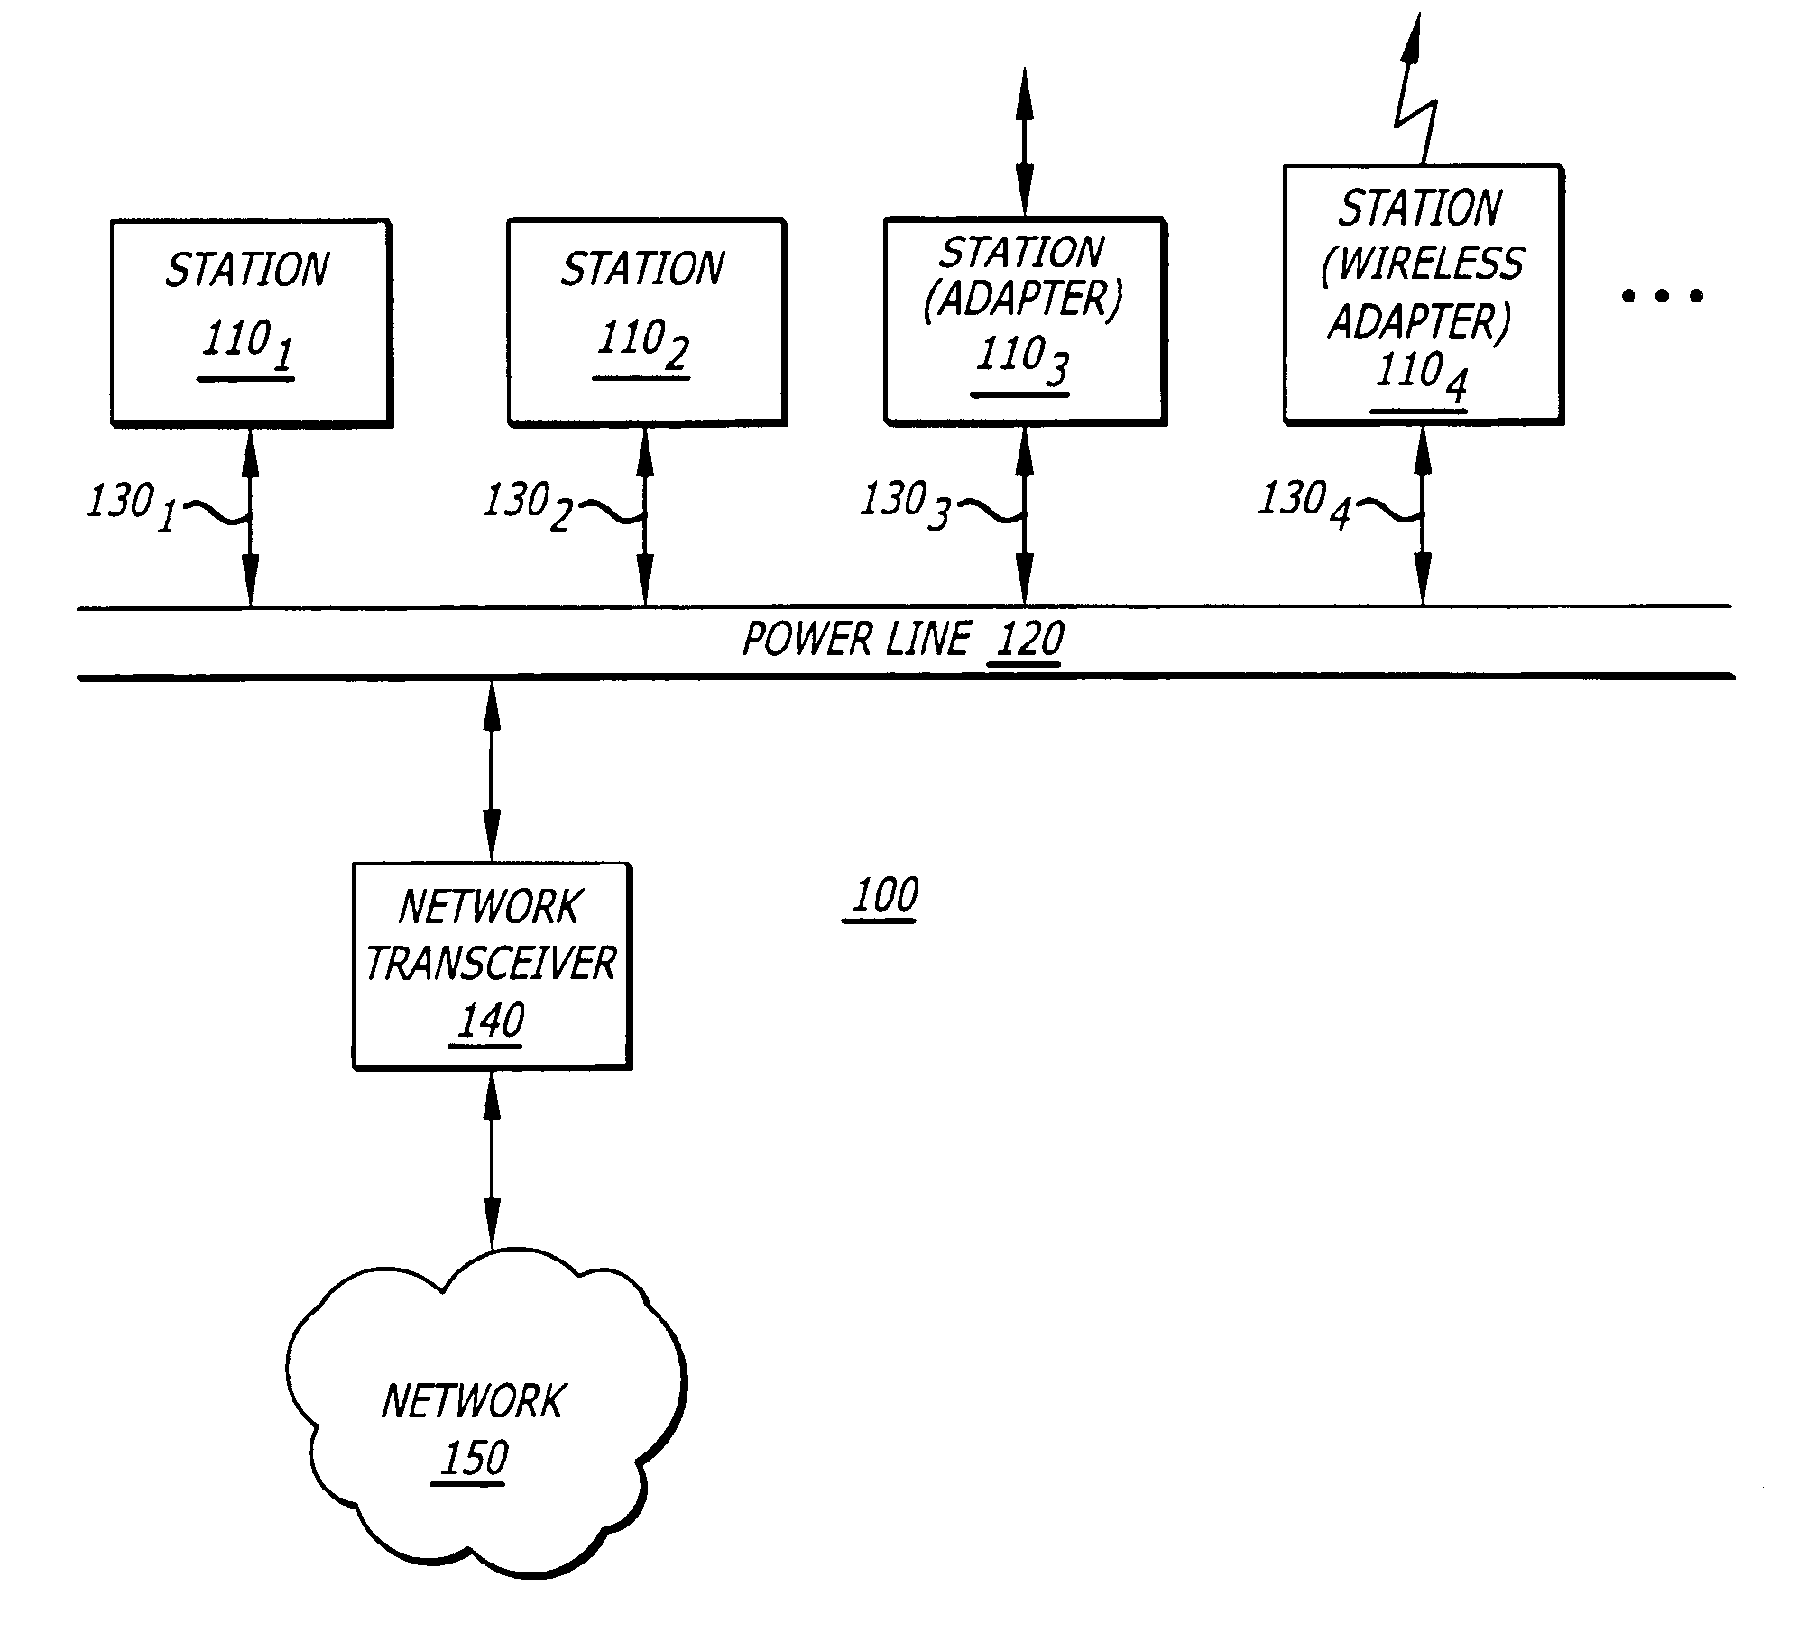 Apparatus and method for a low-rate data transmission mode over a power line